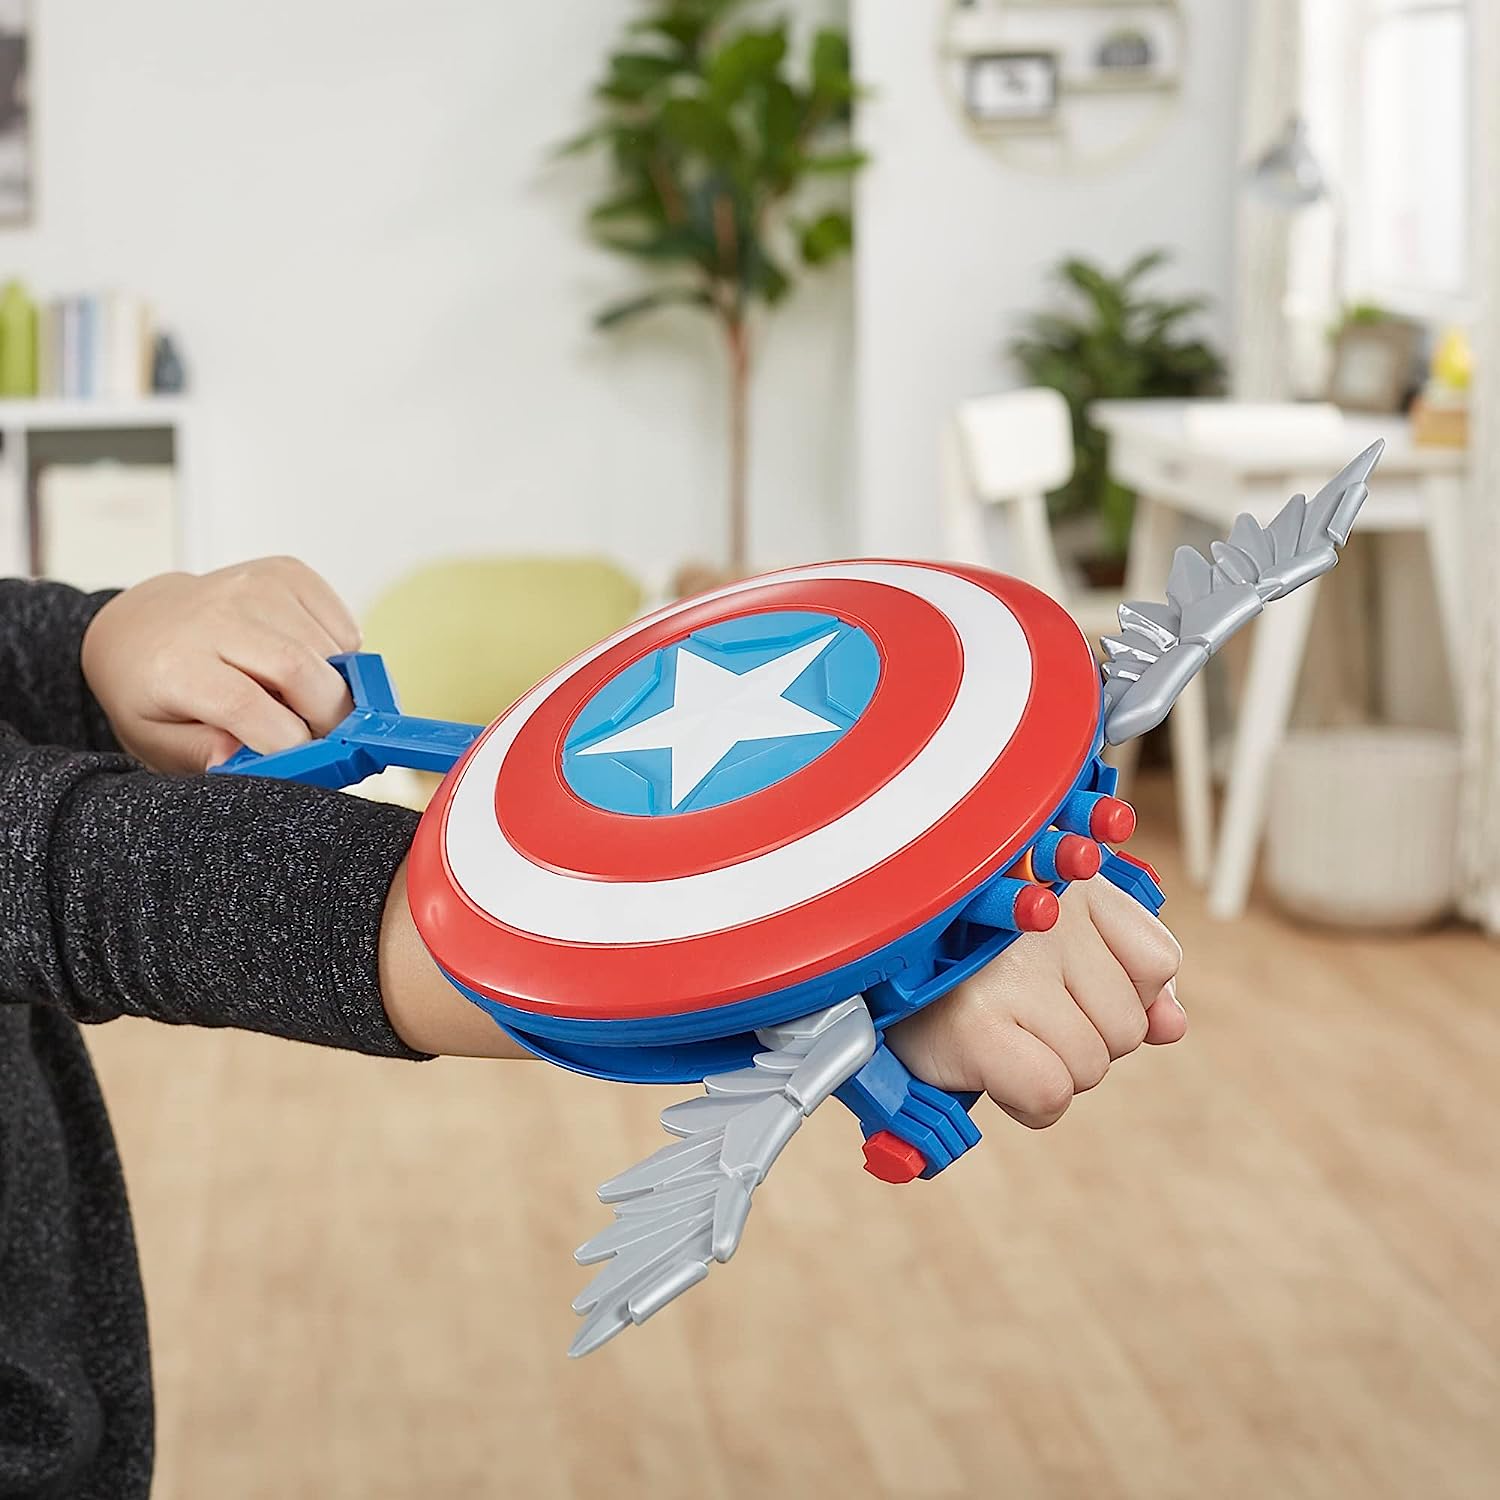 Marvel Mech Strike Mechasaurs Captain America Redwing NERF Blaster with 3 Darts for Kids Ages 5 Years and Up